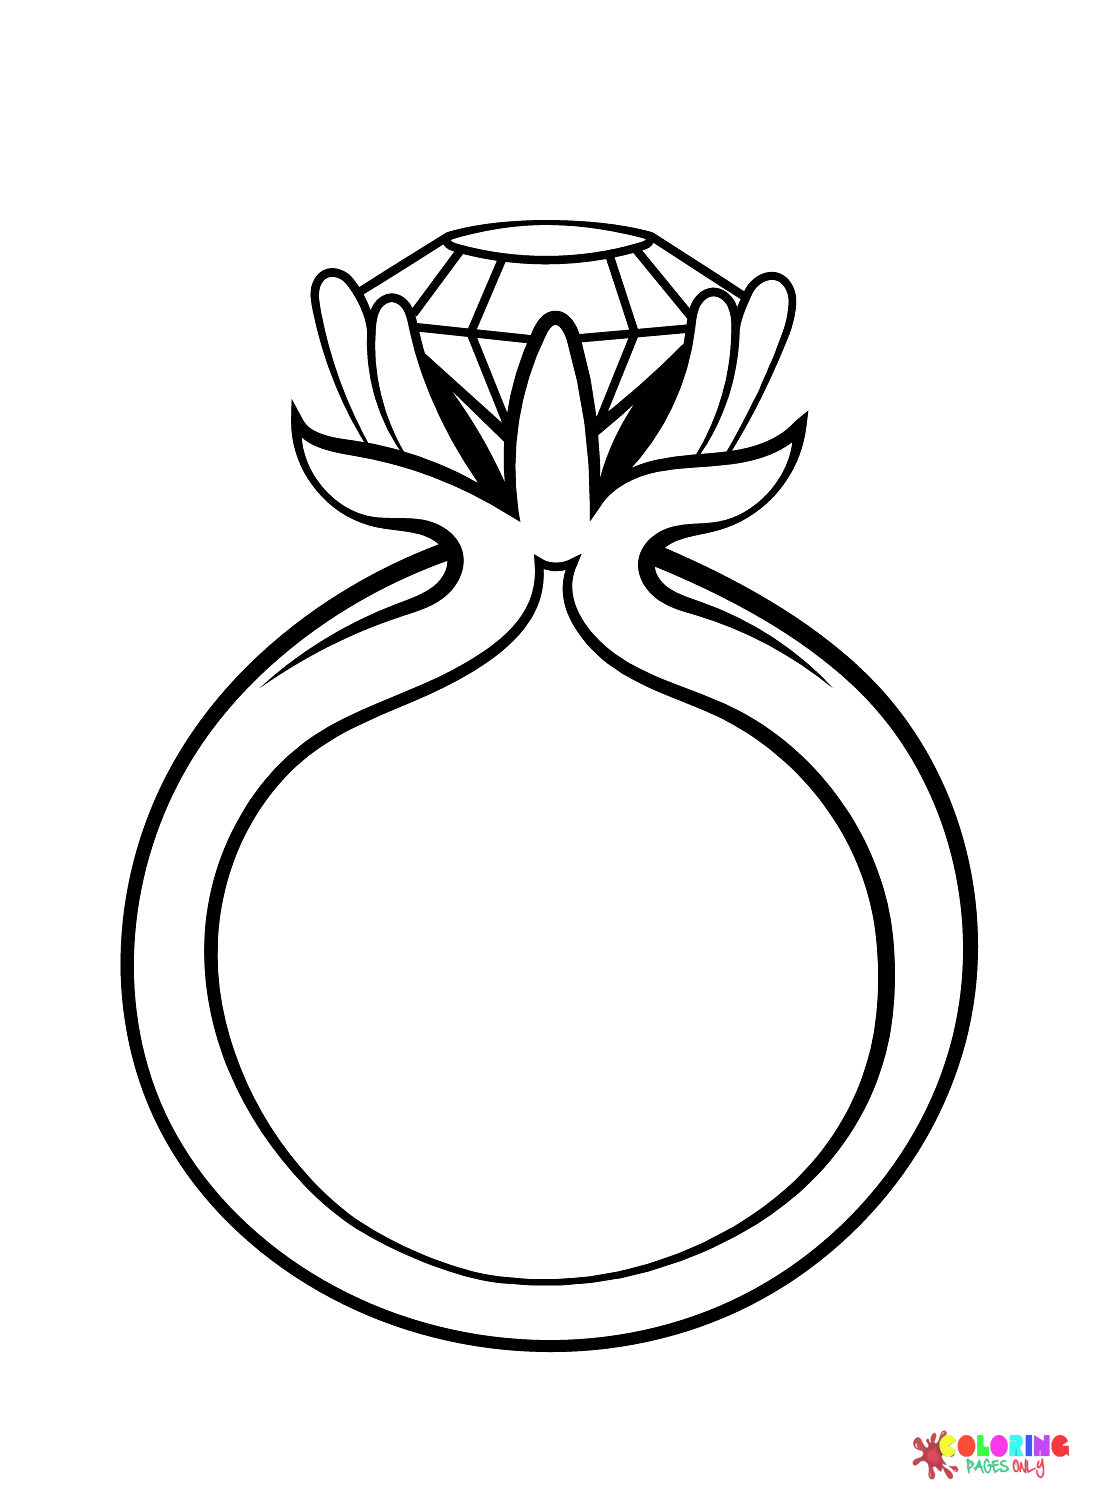 Wedding Ring Diamond Coloring Page - Free Printable Coloring Pages